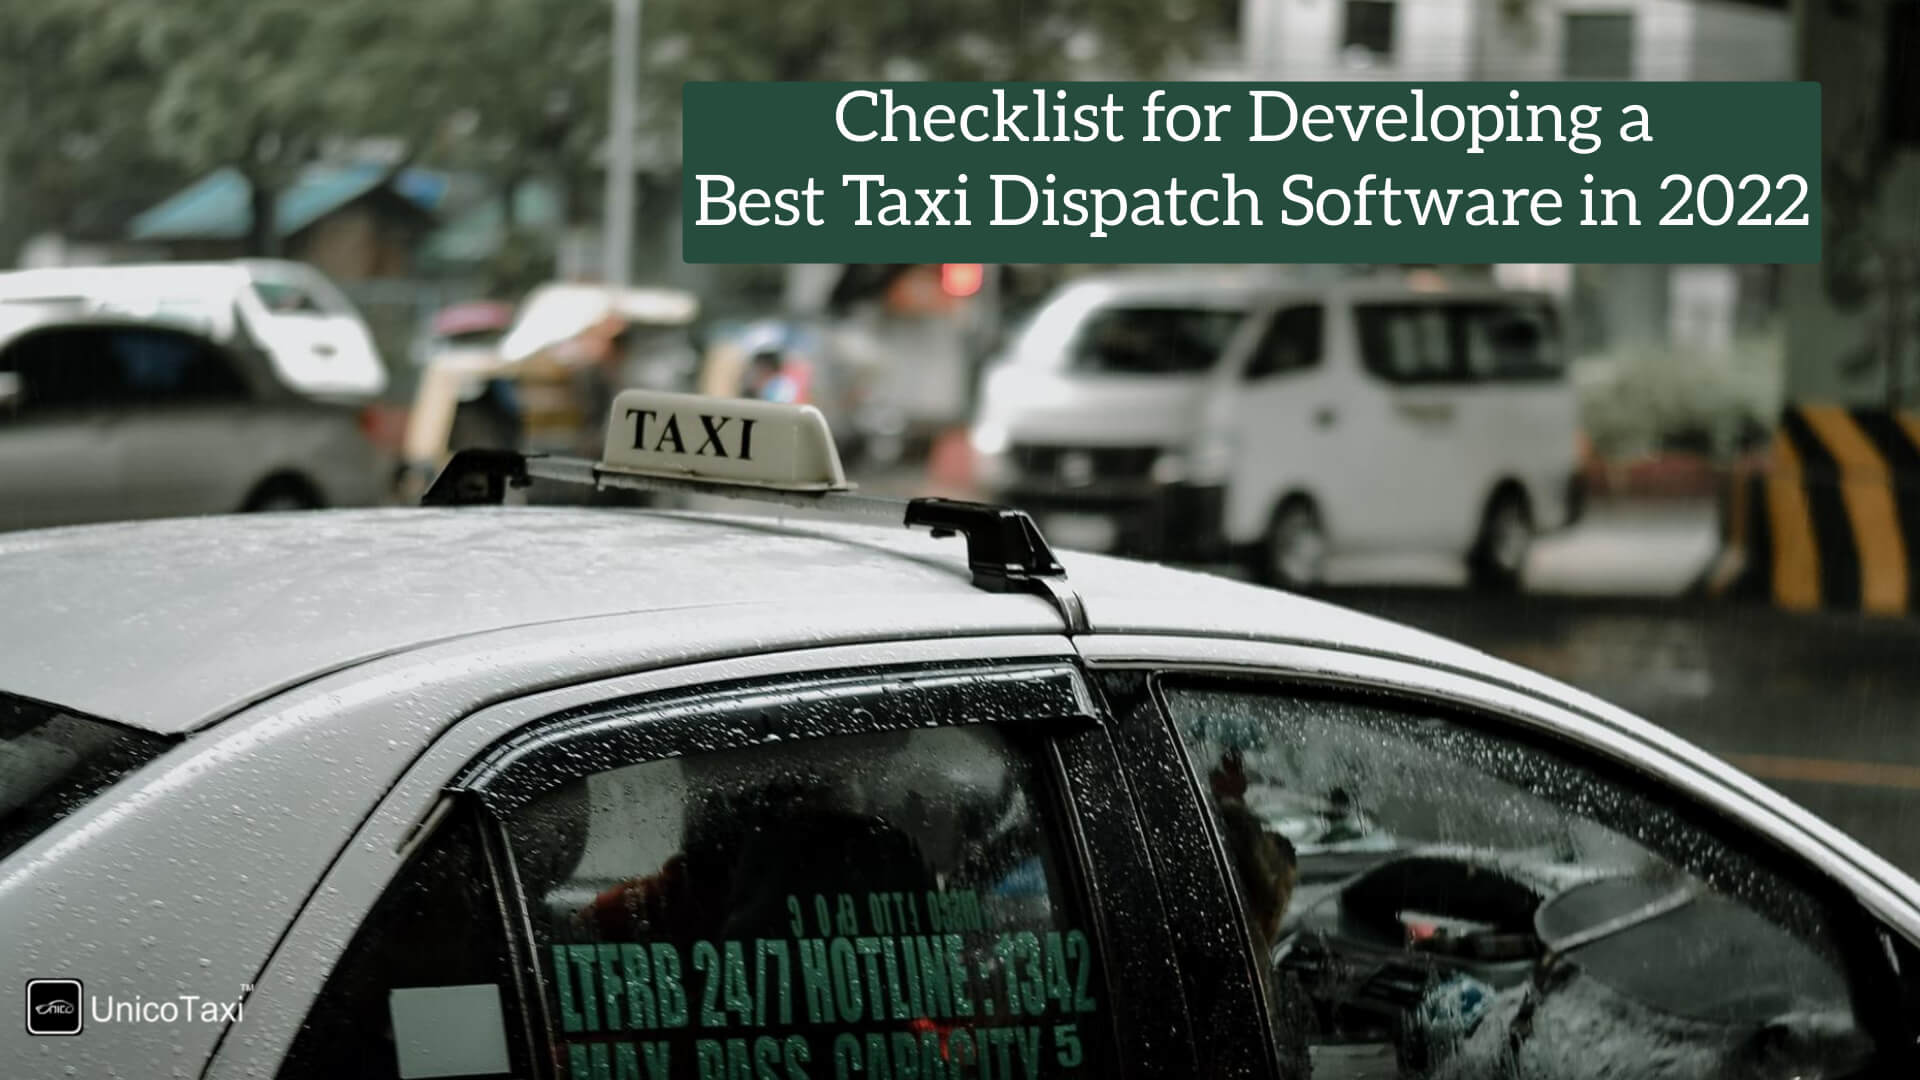 Checklist for Developing a Best Taxi Dispatch Software in 2022